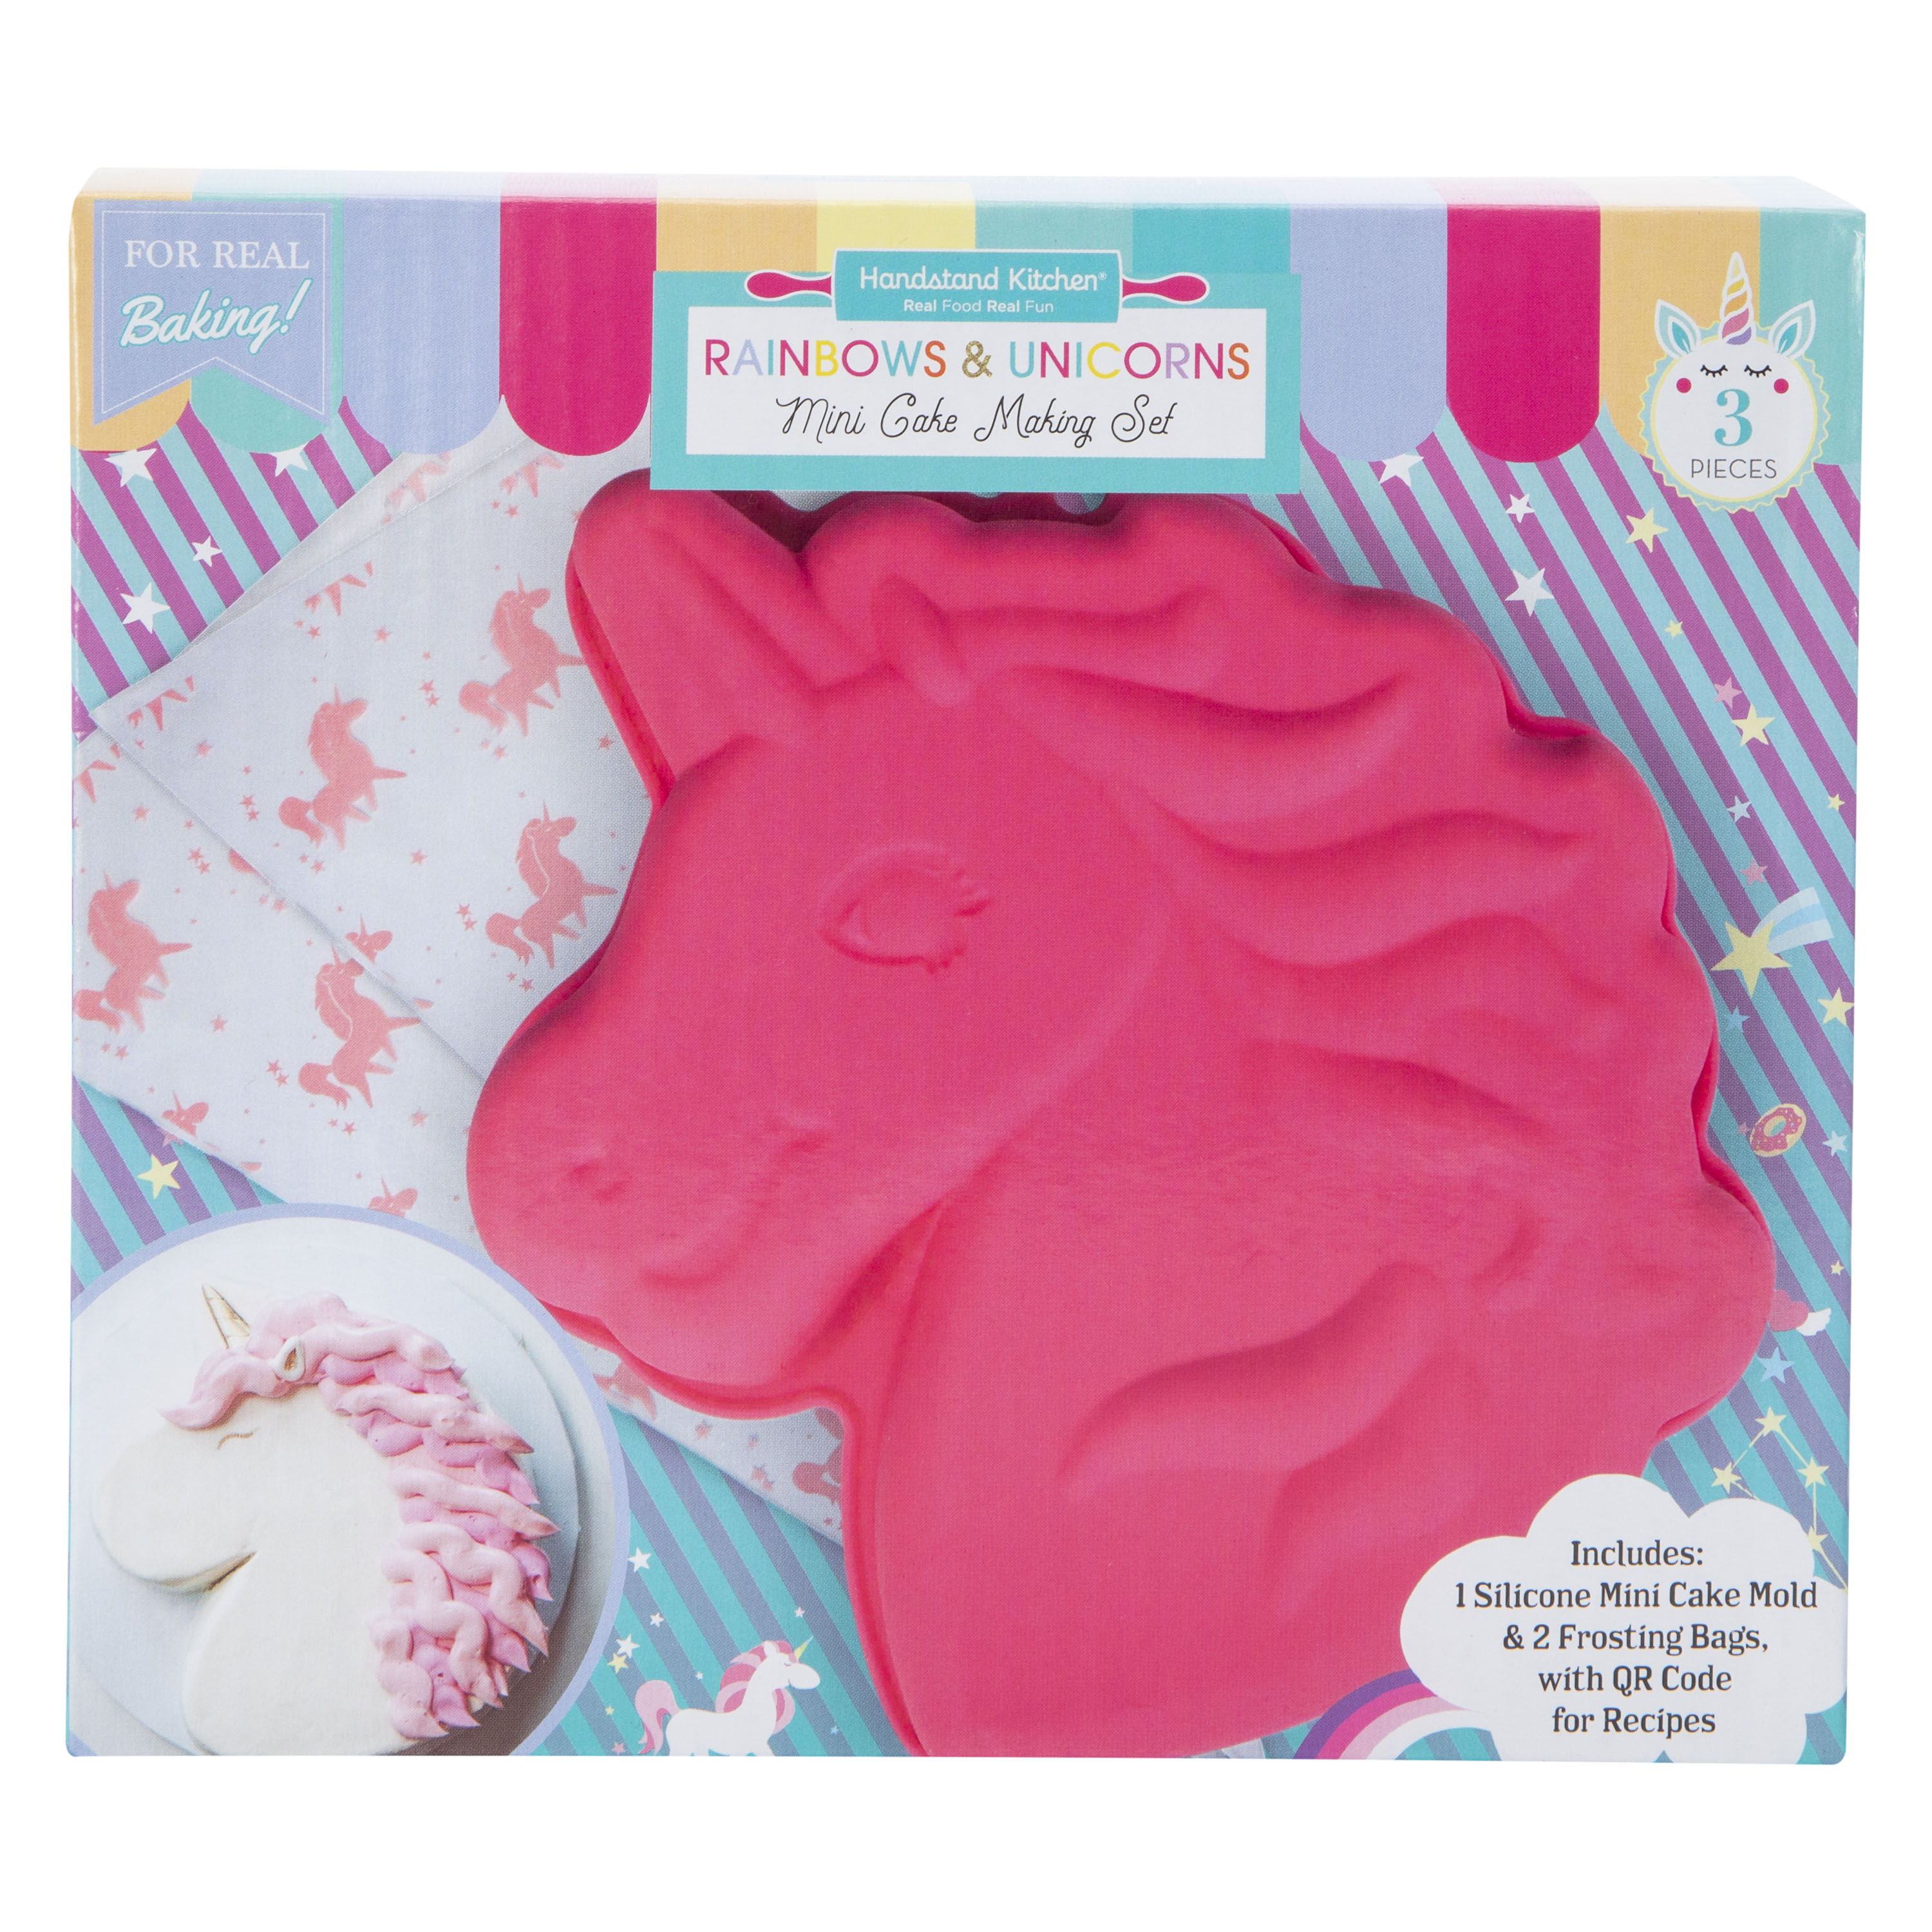 Out of This World Cake Making Set - Handstand Kitchen - Dancing Bear Toys